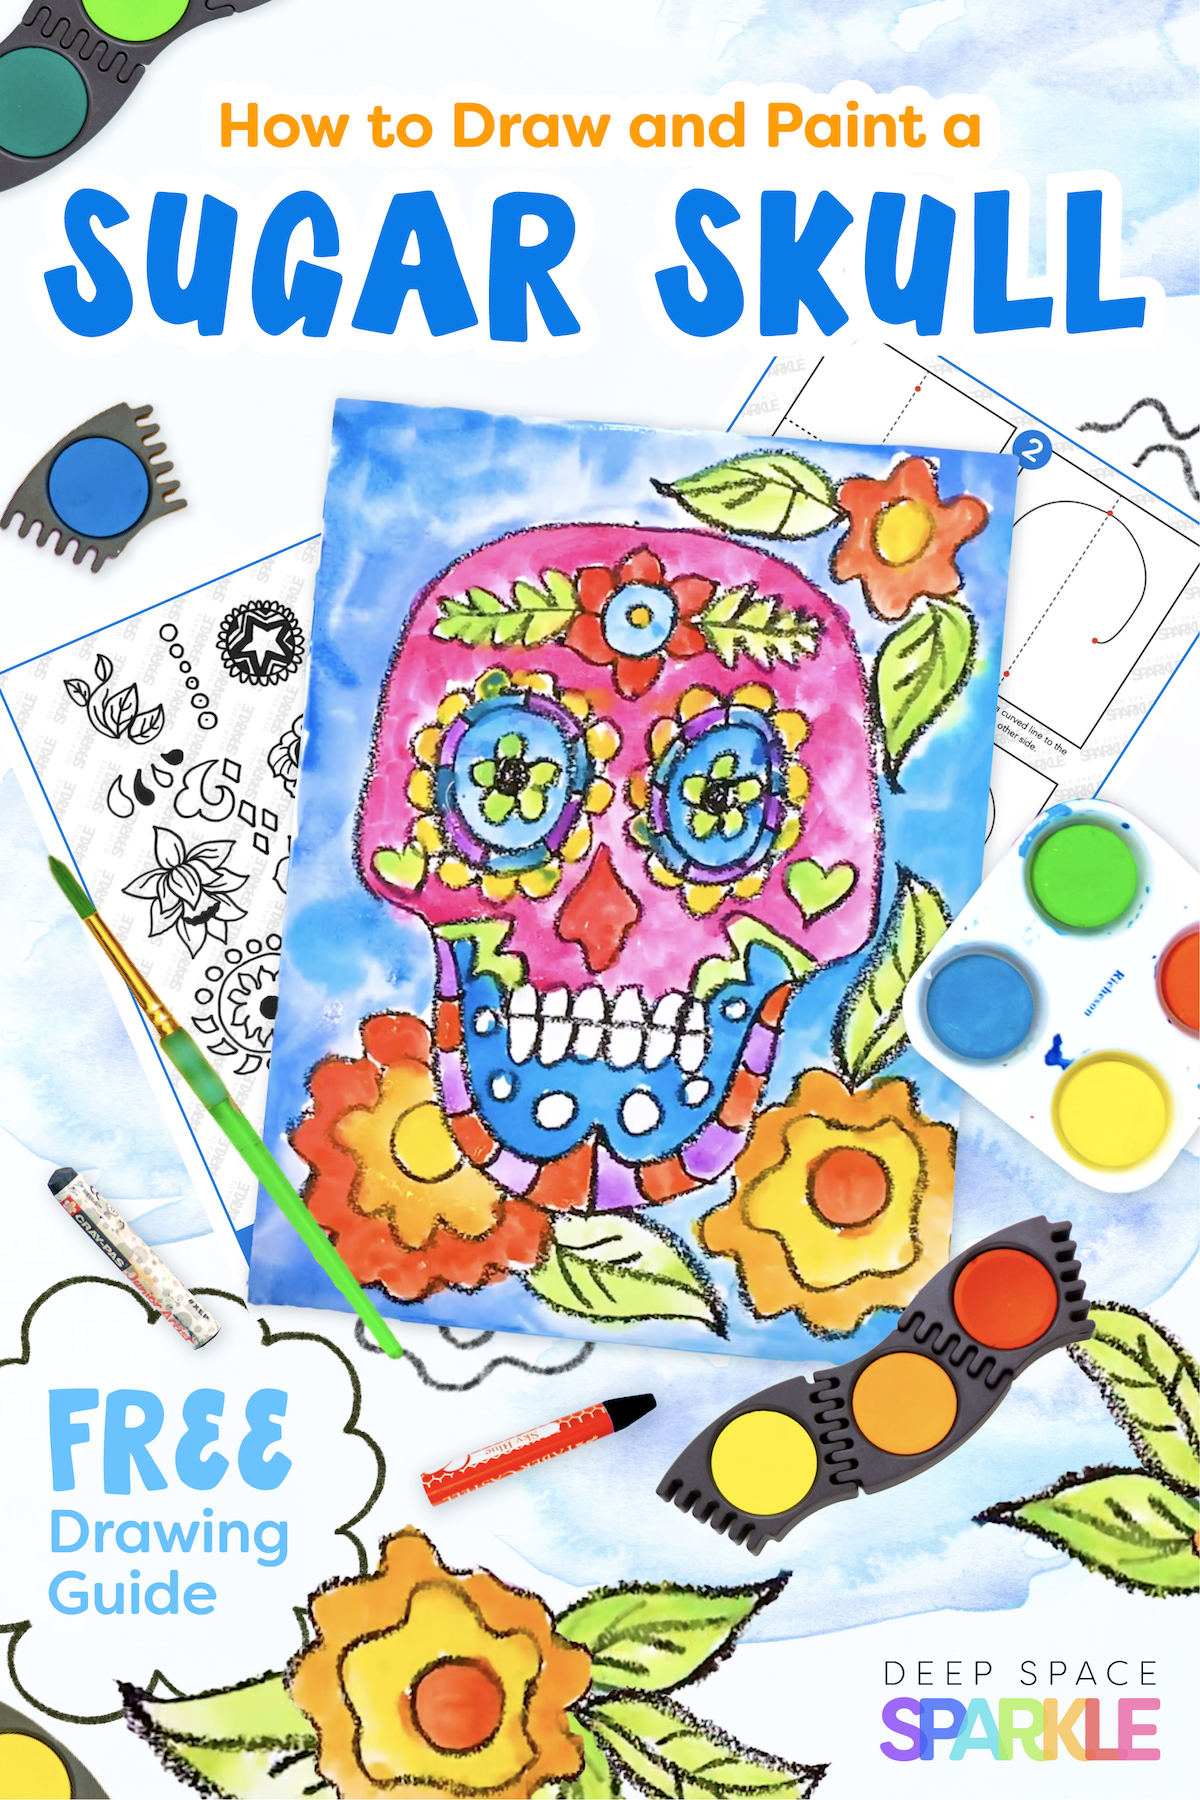 How to Draw and Paint a Sugar Skull art project for celebrating Day of the Dead, Dia de los Muertos in the art room or at home with kids with FREE downloadable drawing guide template